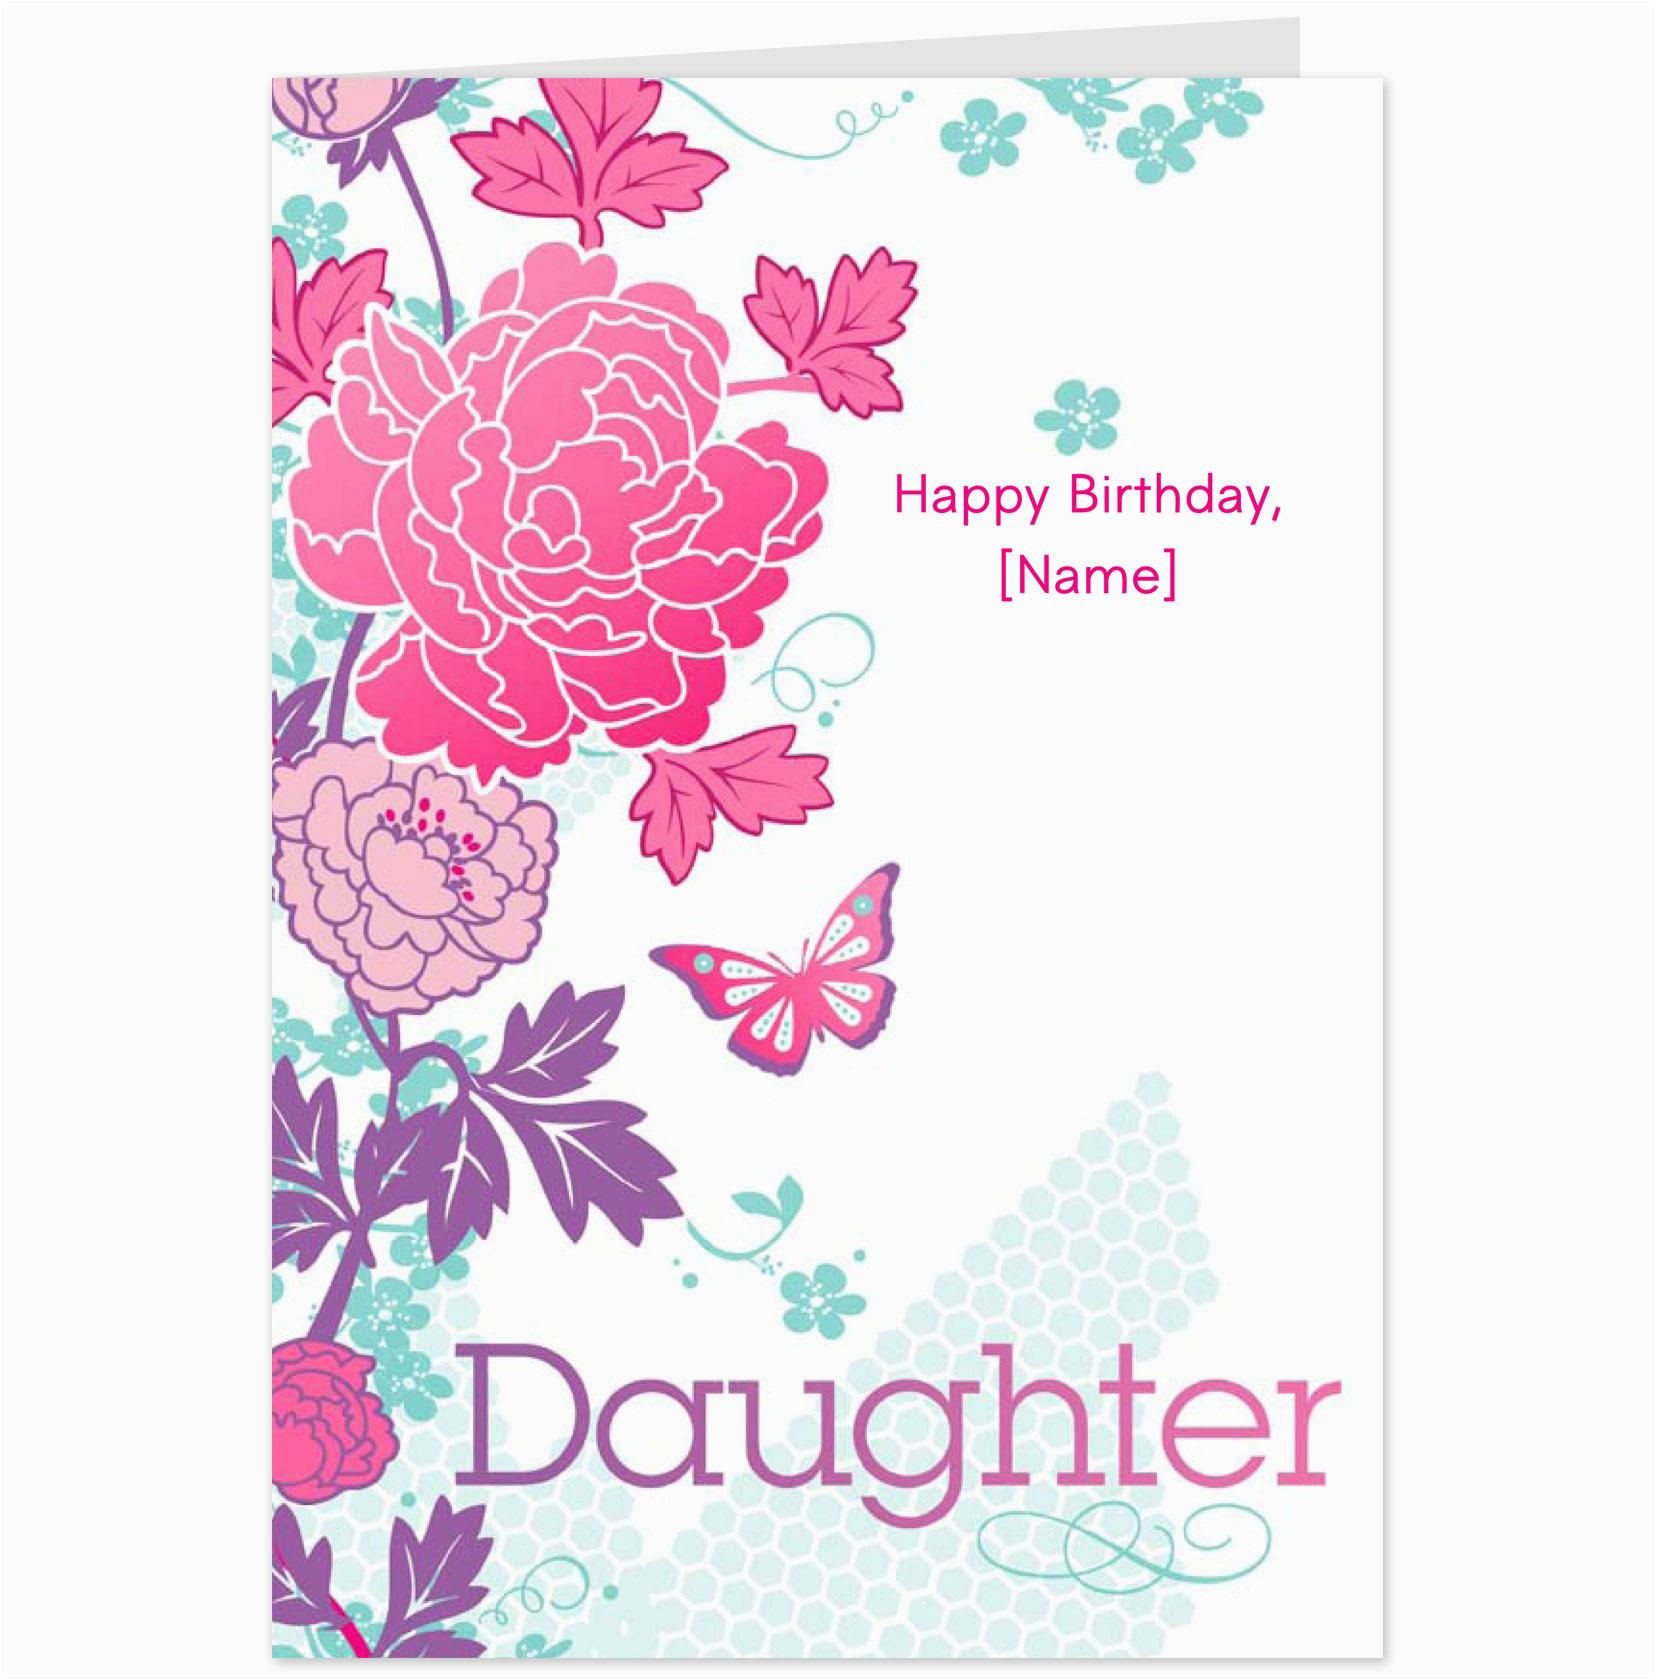 birthday cards for daughter within ucwords card design